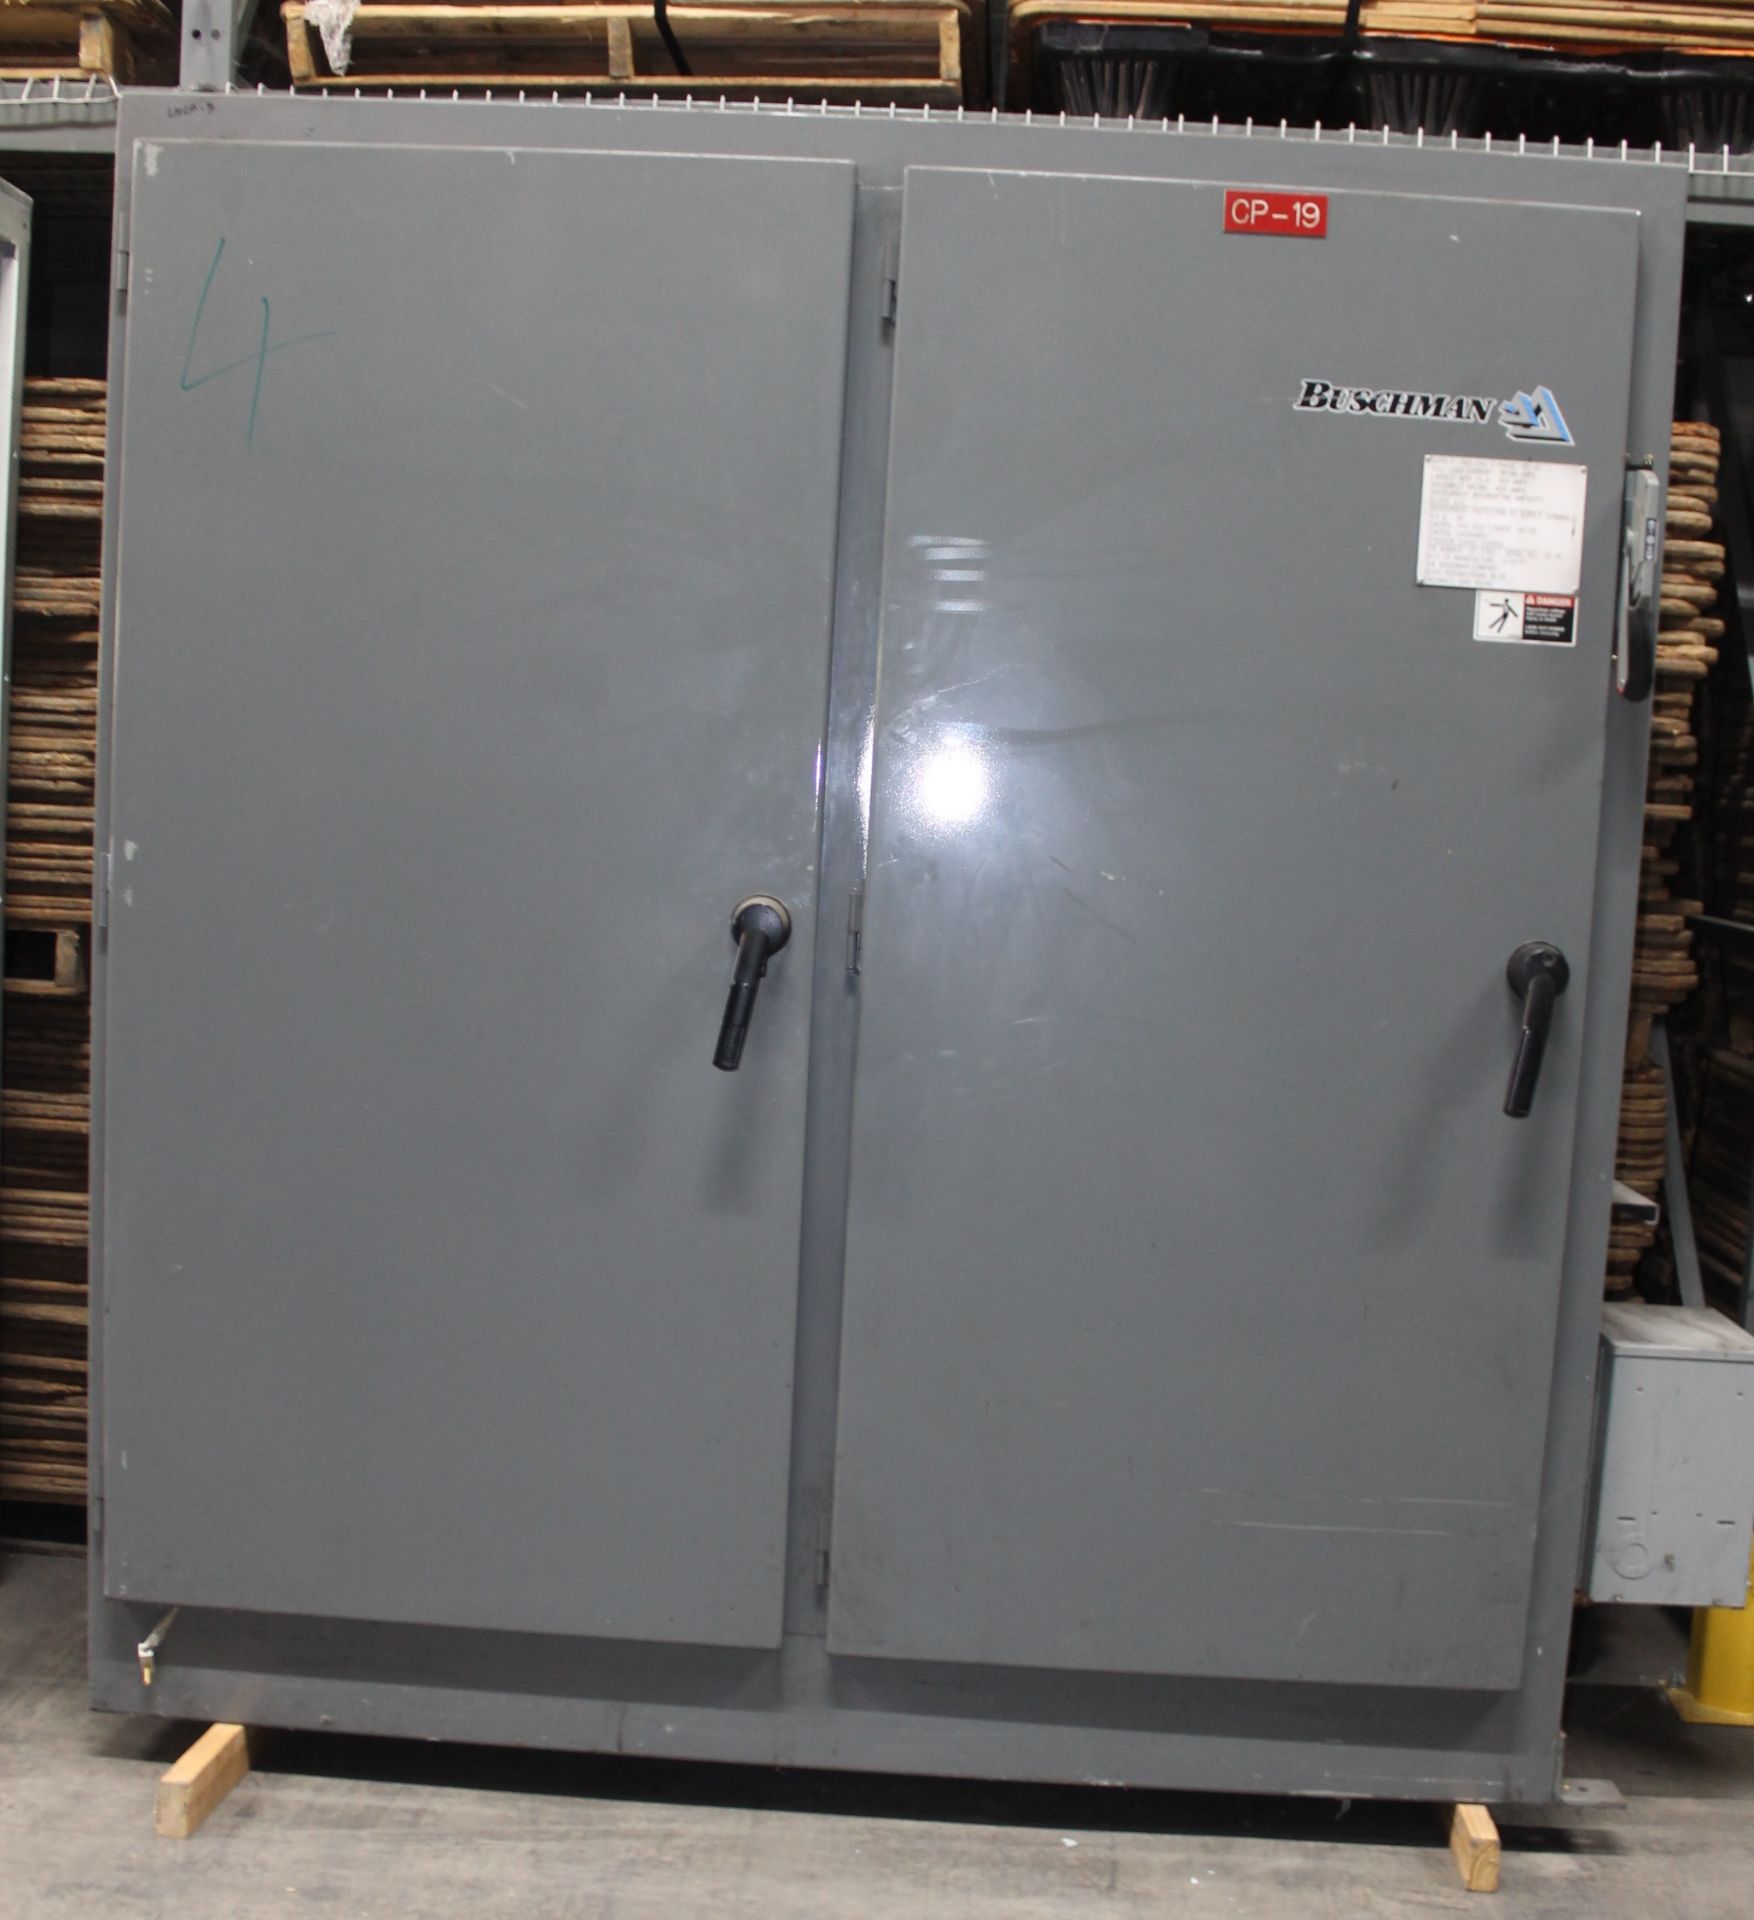 BUSCHMAN CONVEYOR AUTOMATION CONTROL PANEL CABINET WITH CONTROLS, CABINET SIZE: 90"L X 20"W X 87"H